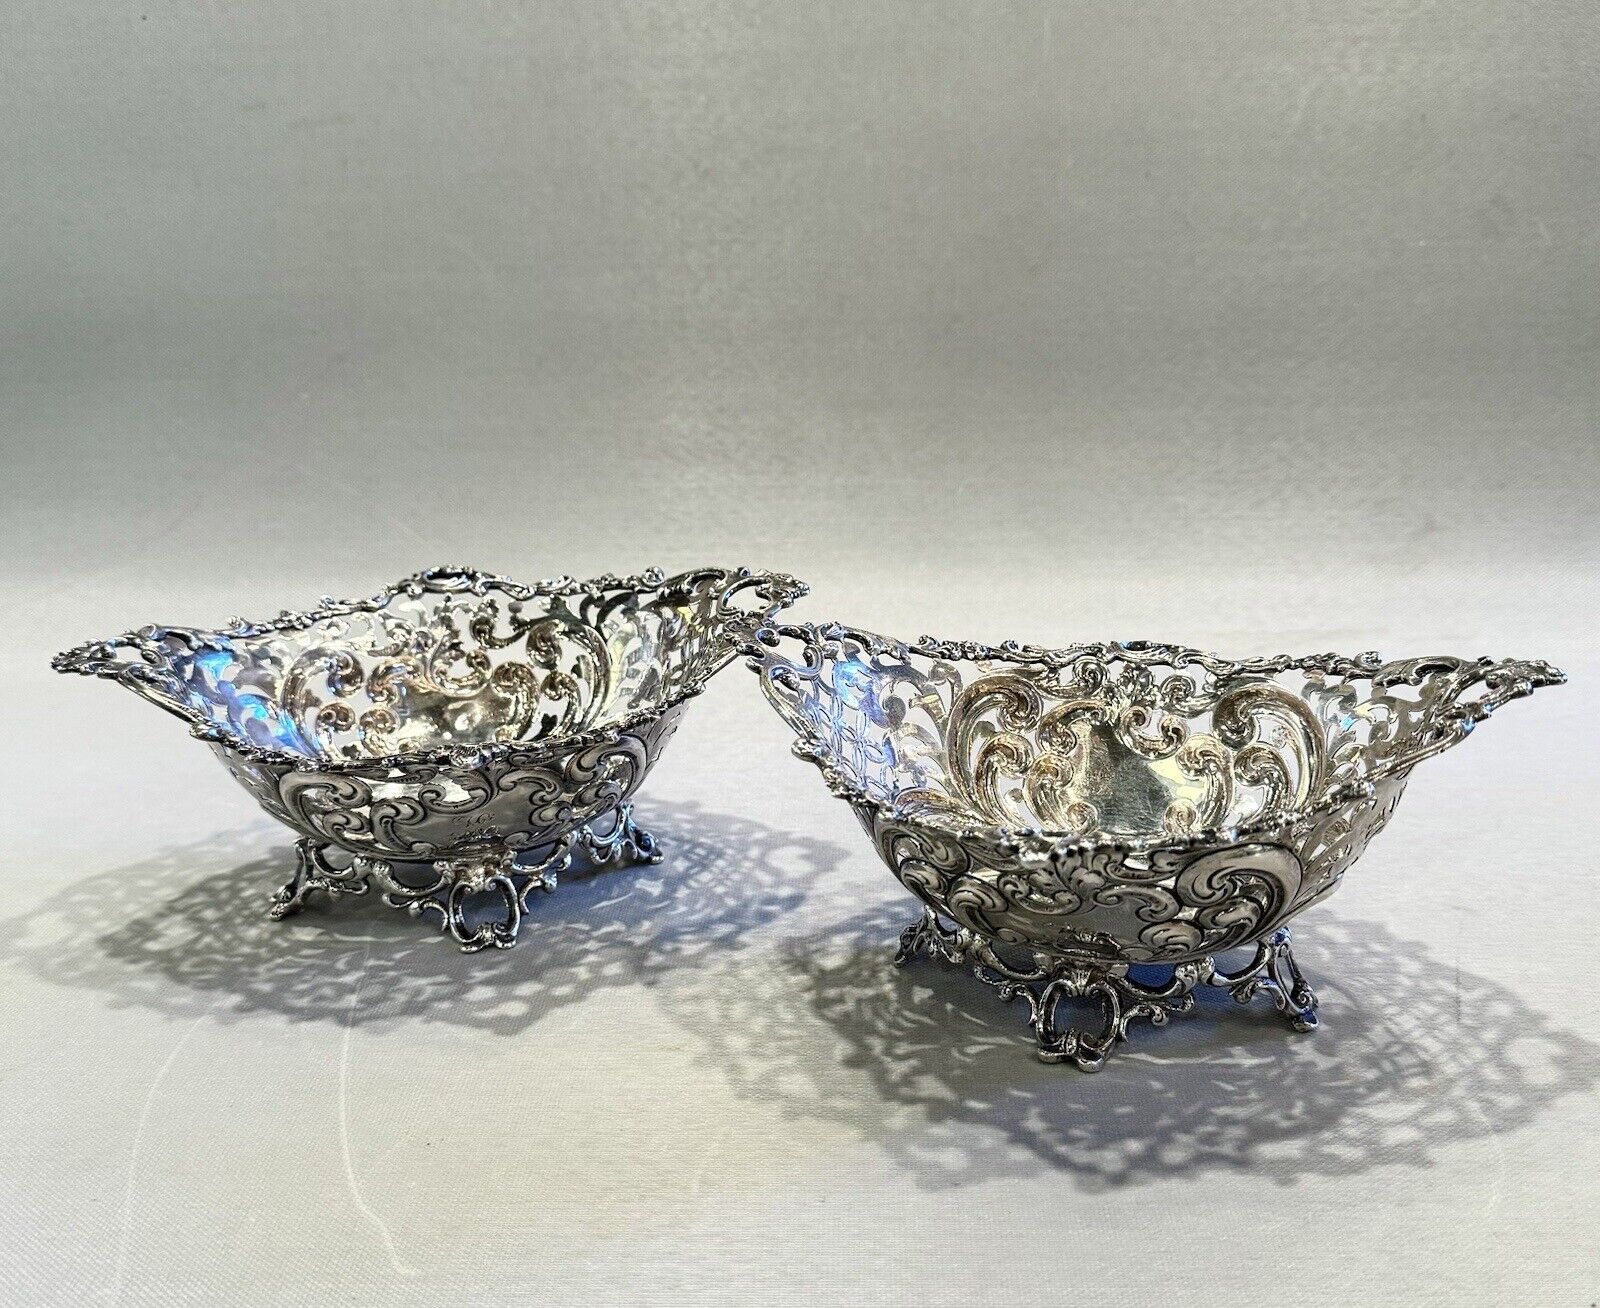 Pair of Antique Theodore Starr Sterling Silver Pierced Filigree Footed Bowls